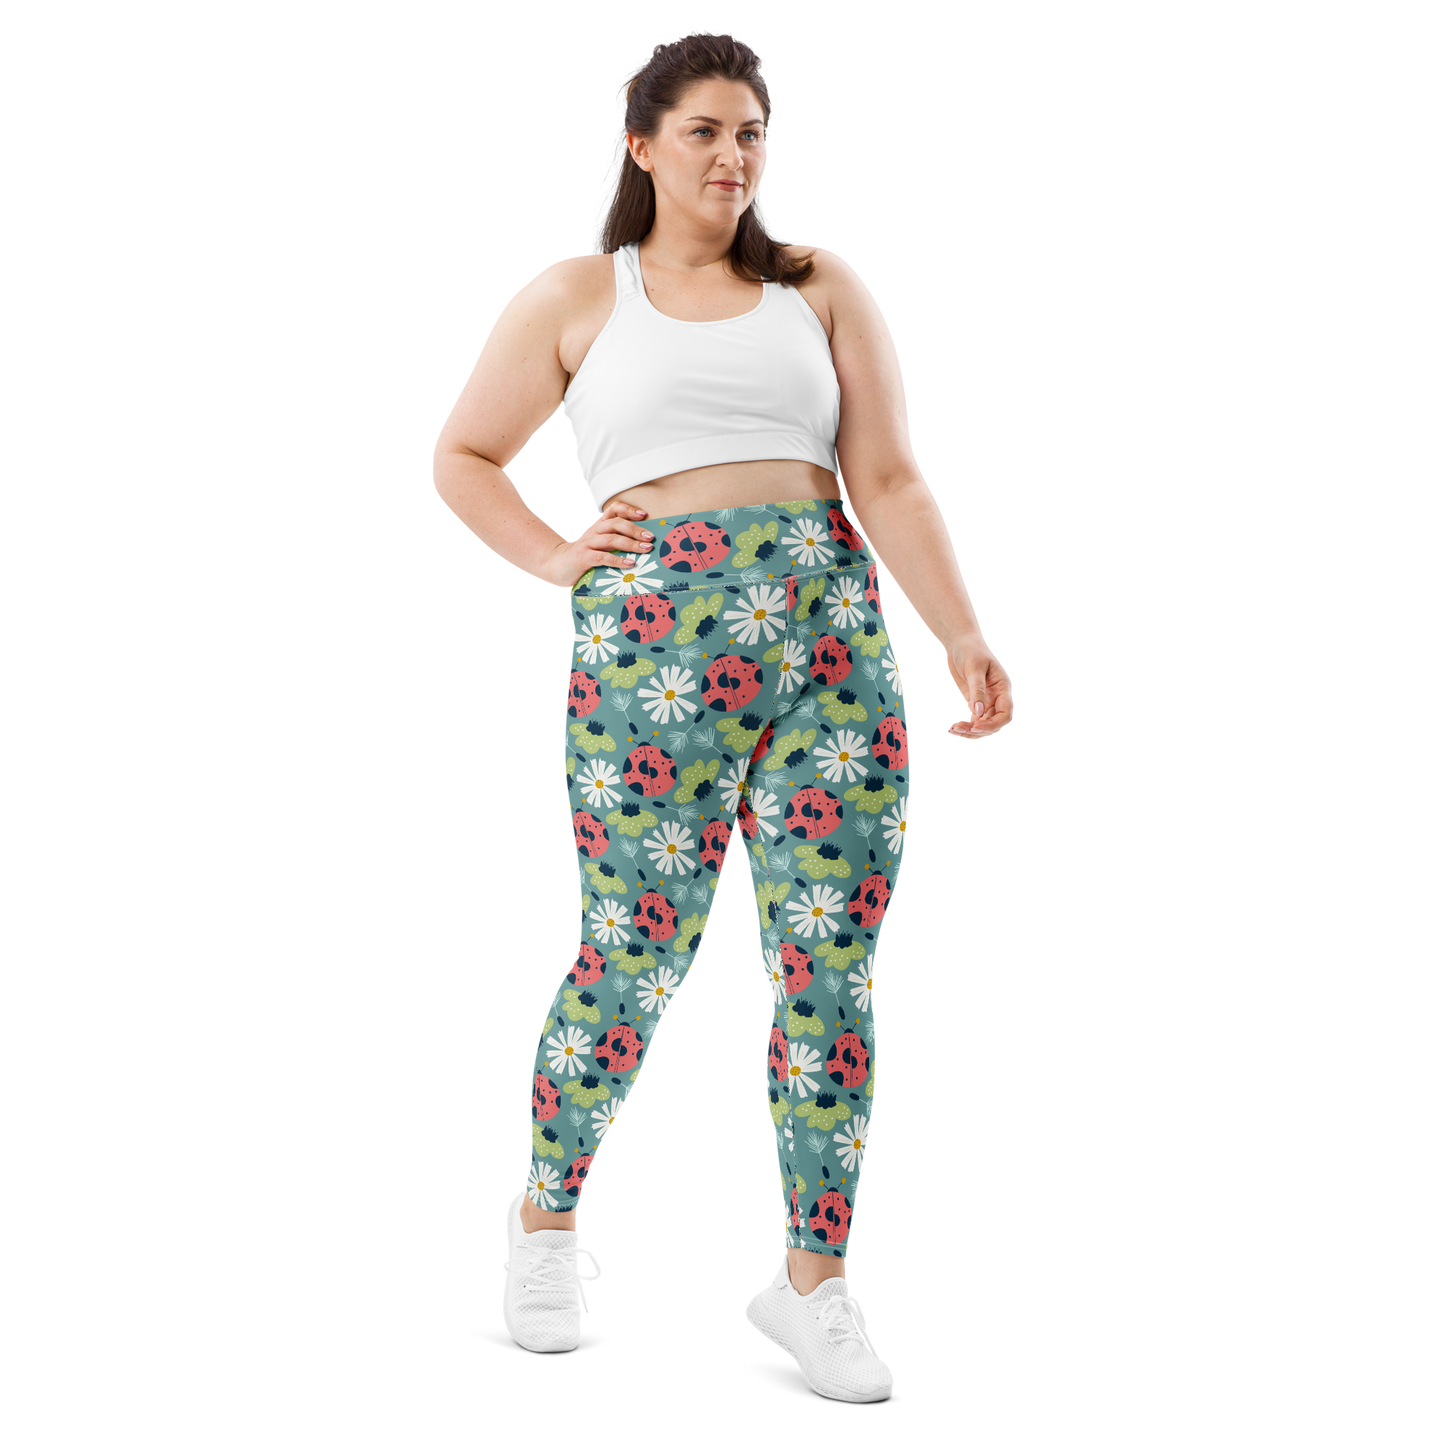 Scandinavian Spring Floral | Seamless Patterns | All-Over Print Plus Size Leggings - #2